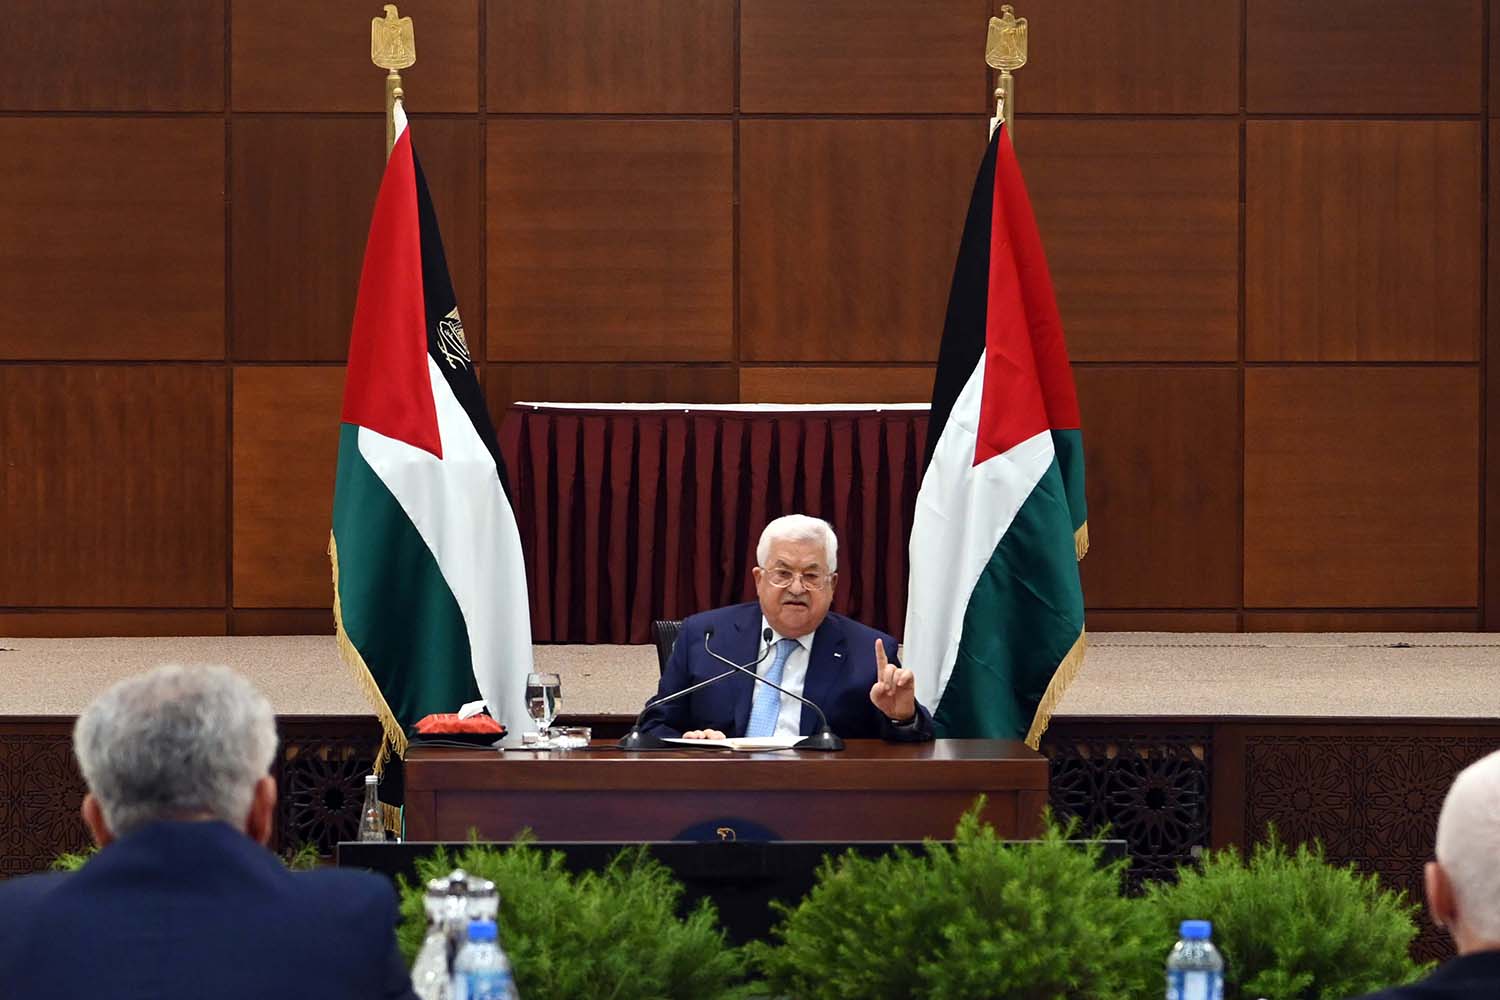 President Abbas chairs meeting of PLO Executive Committee